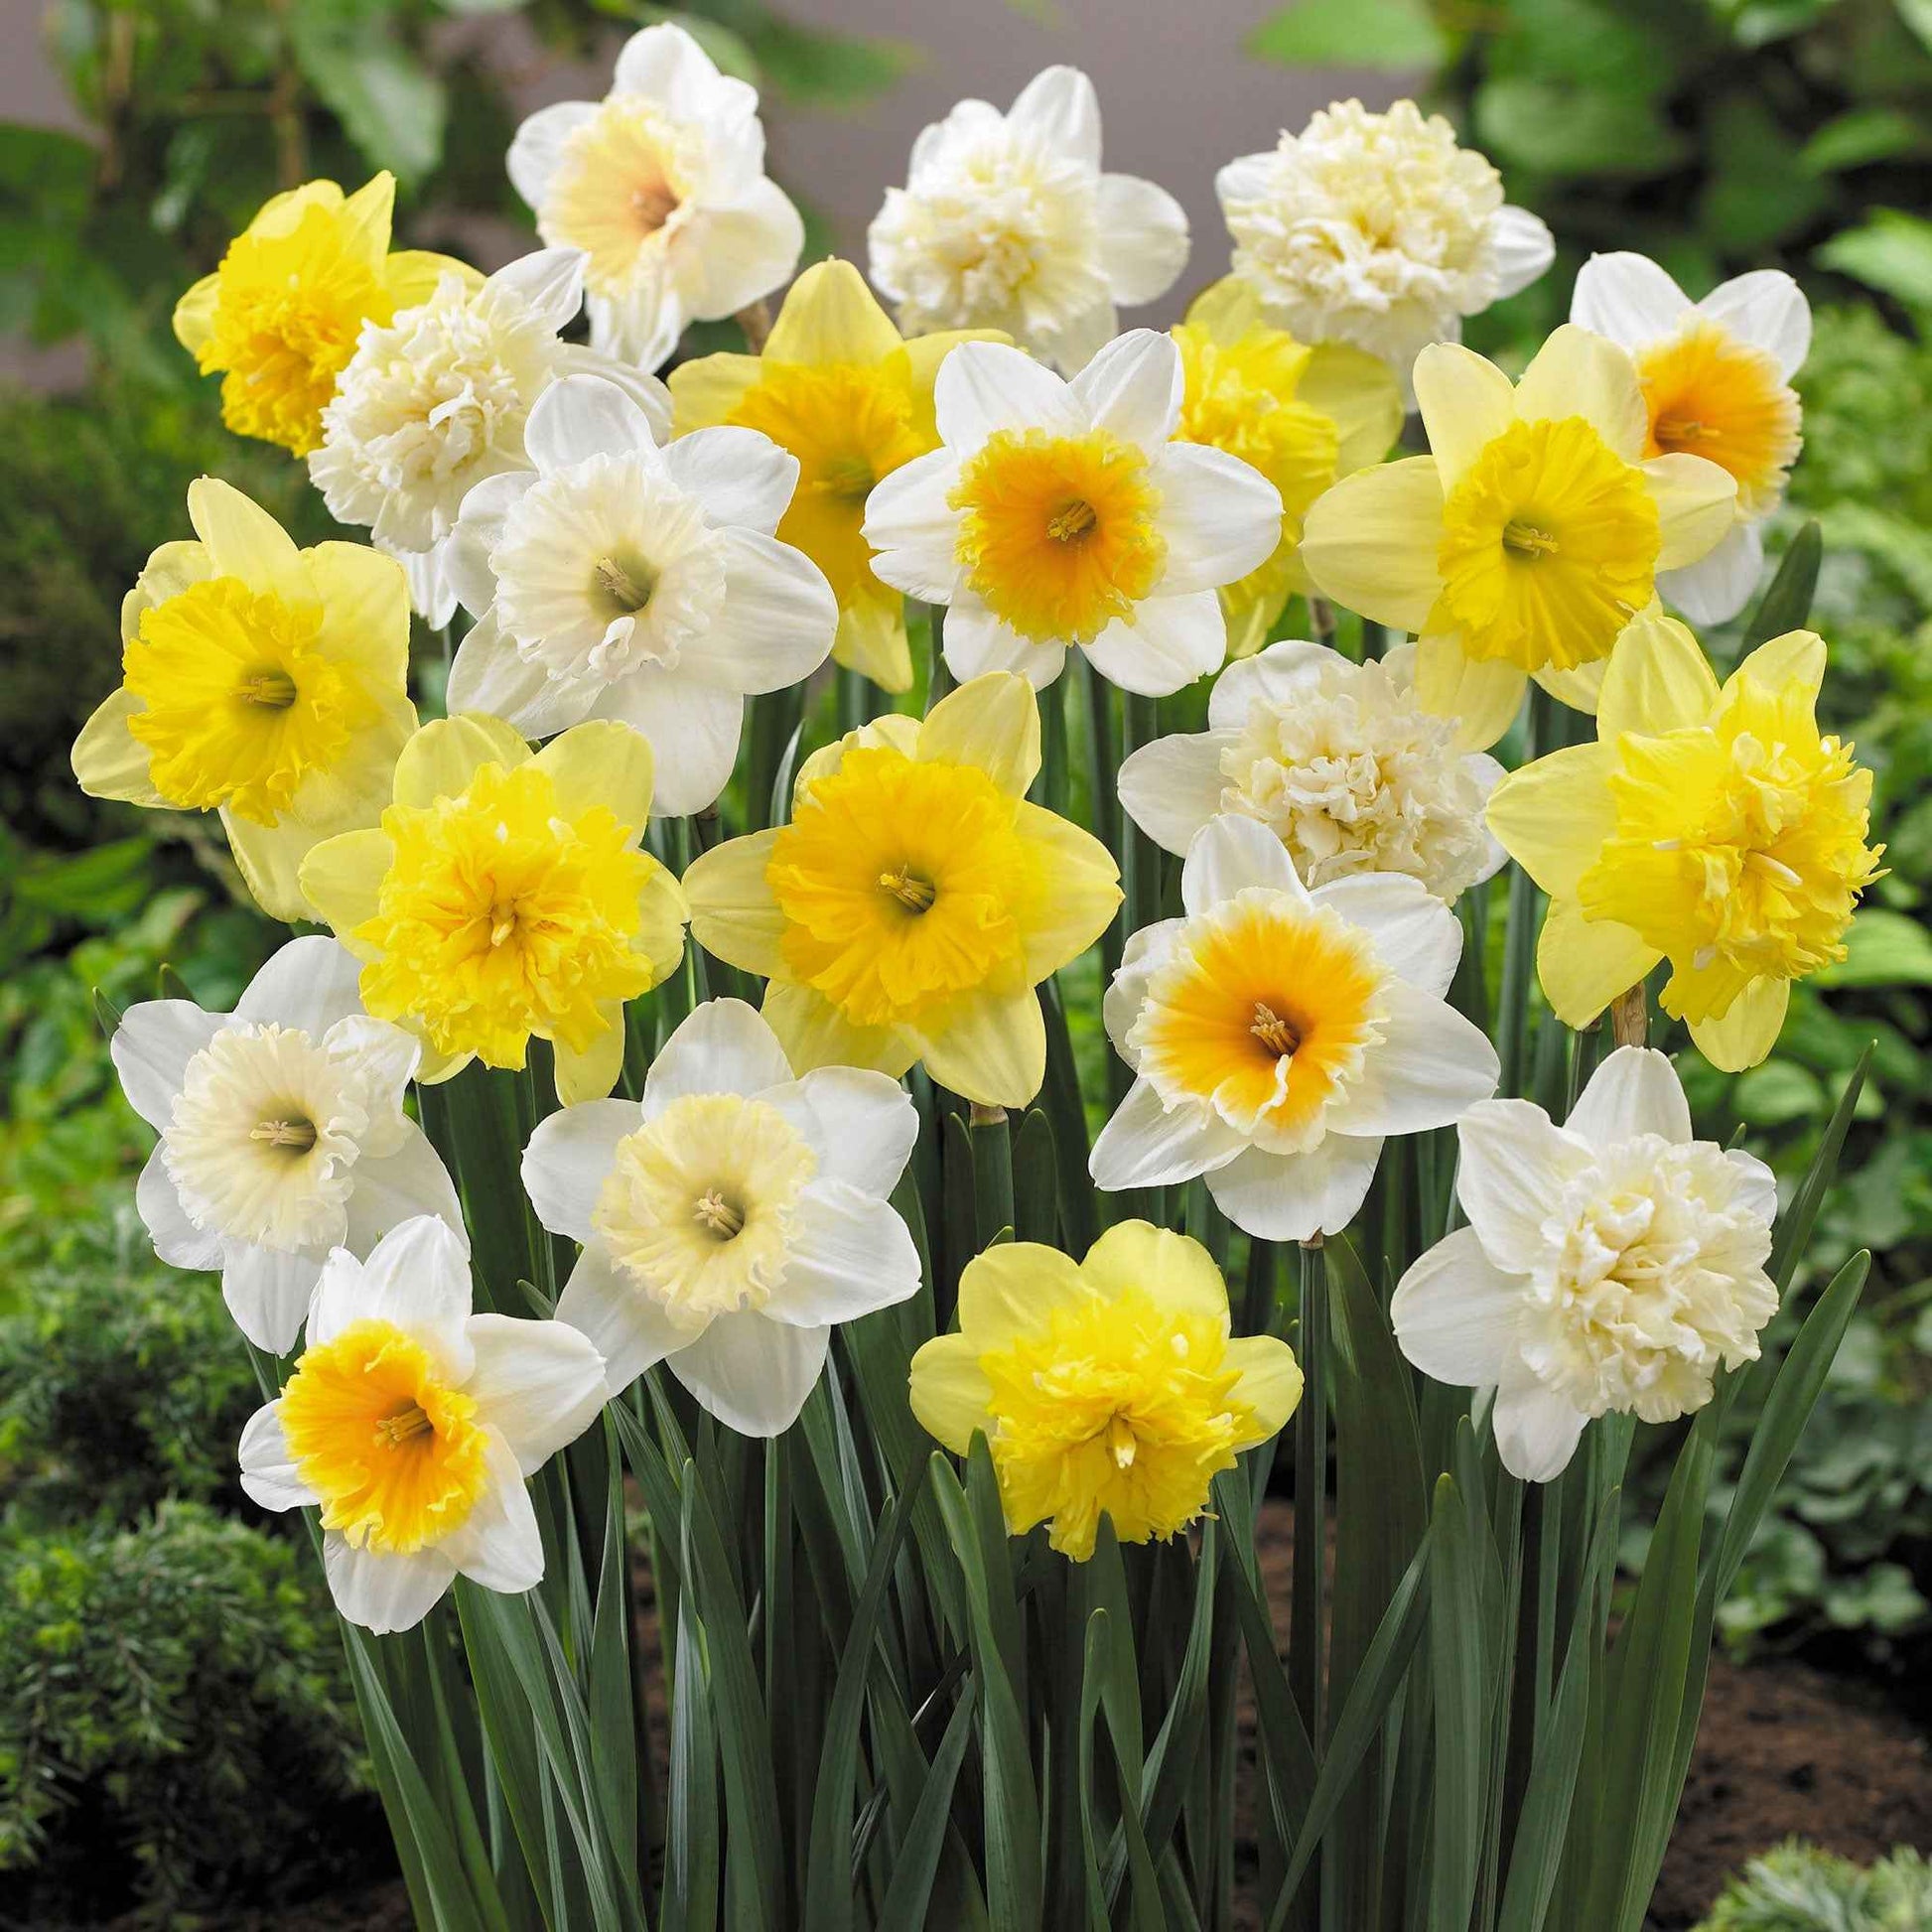 20x Narcis Narcissus - Mix Hello Spring! - Alle populaire bloembollen